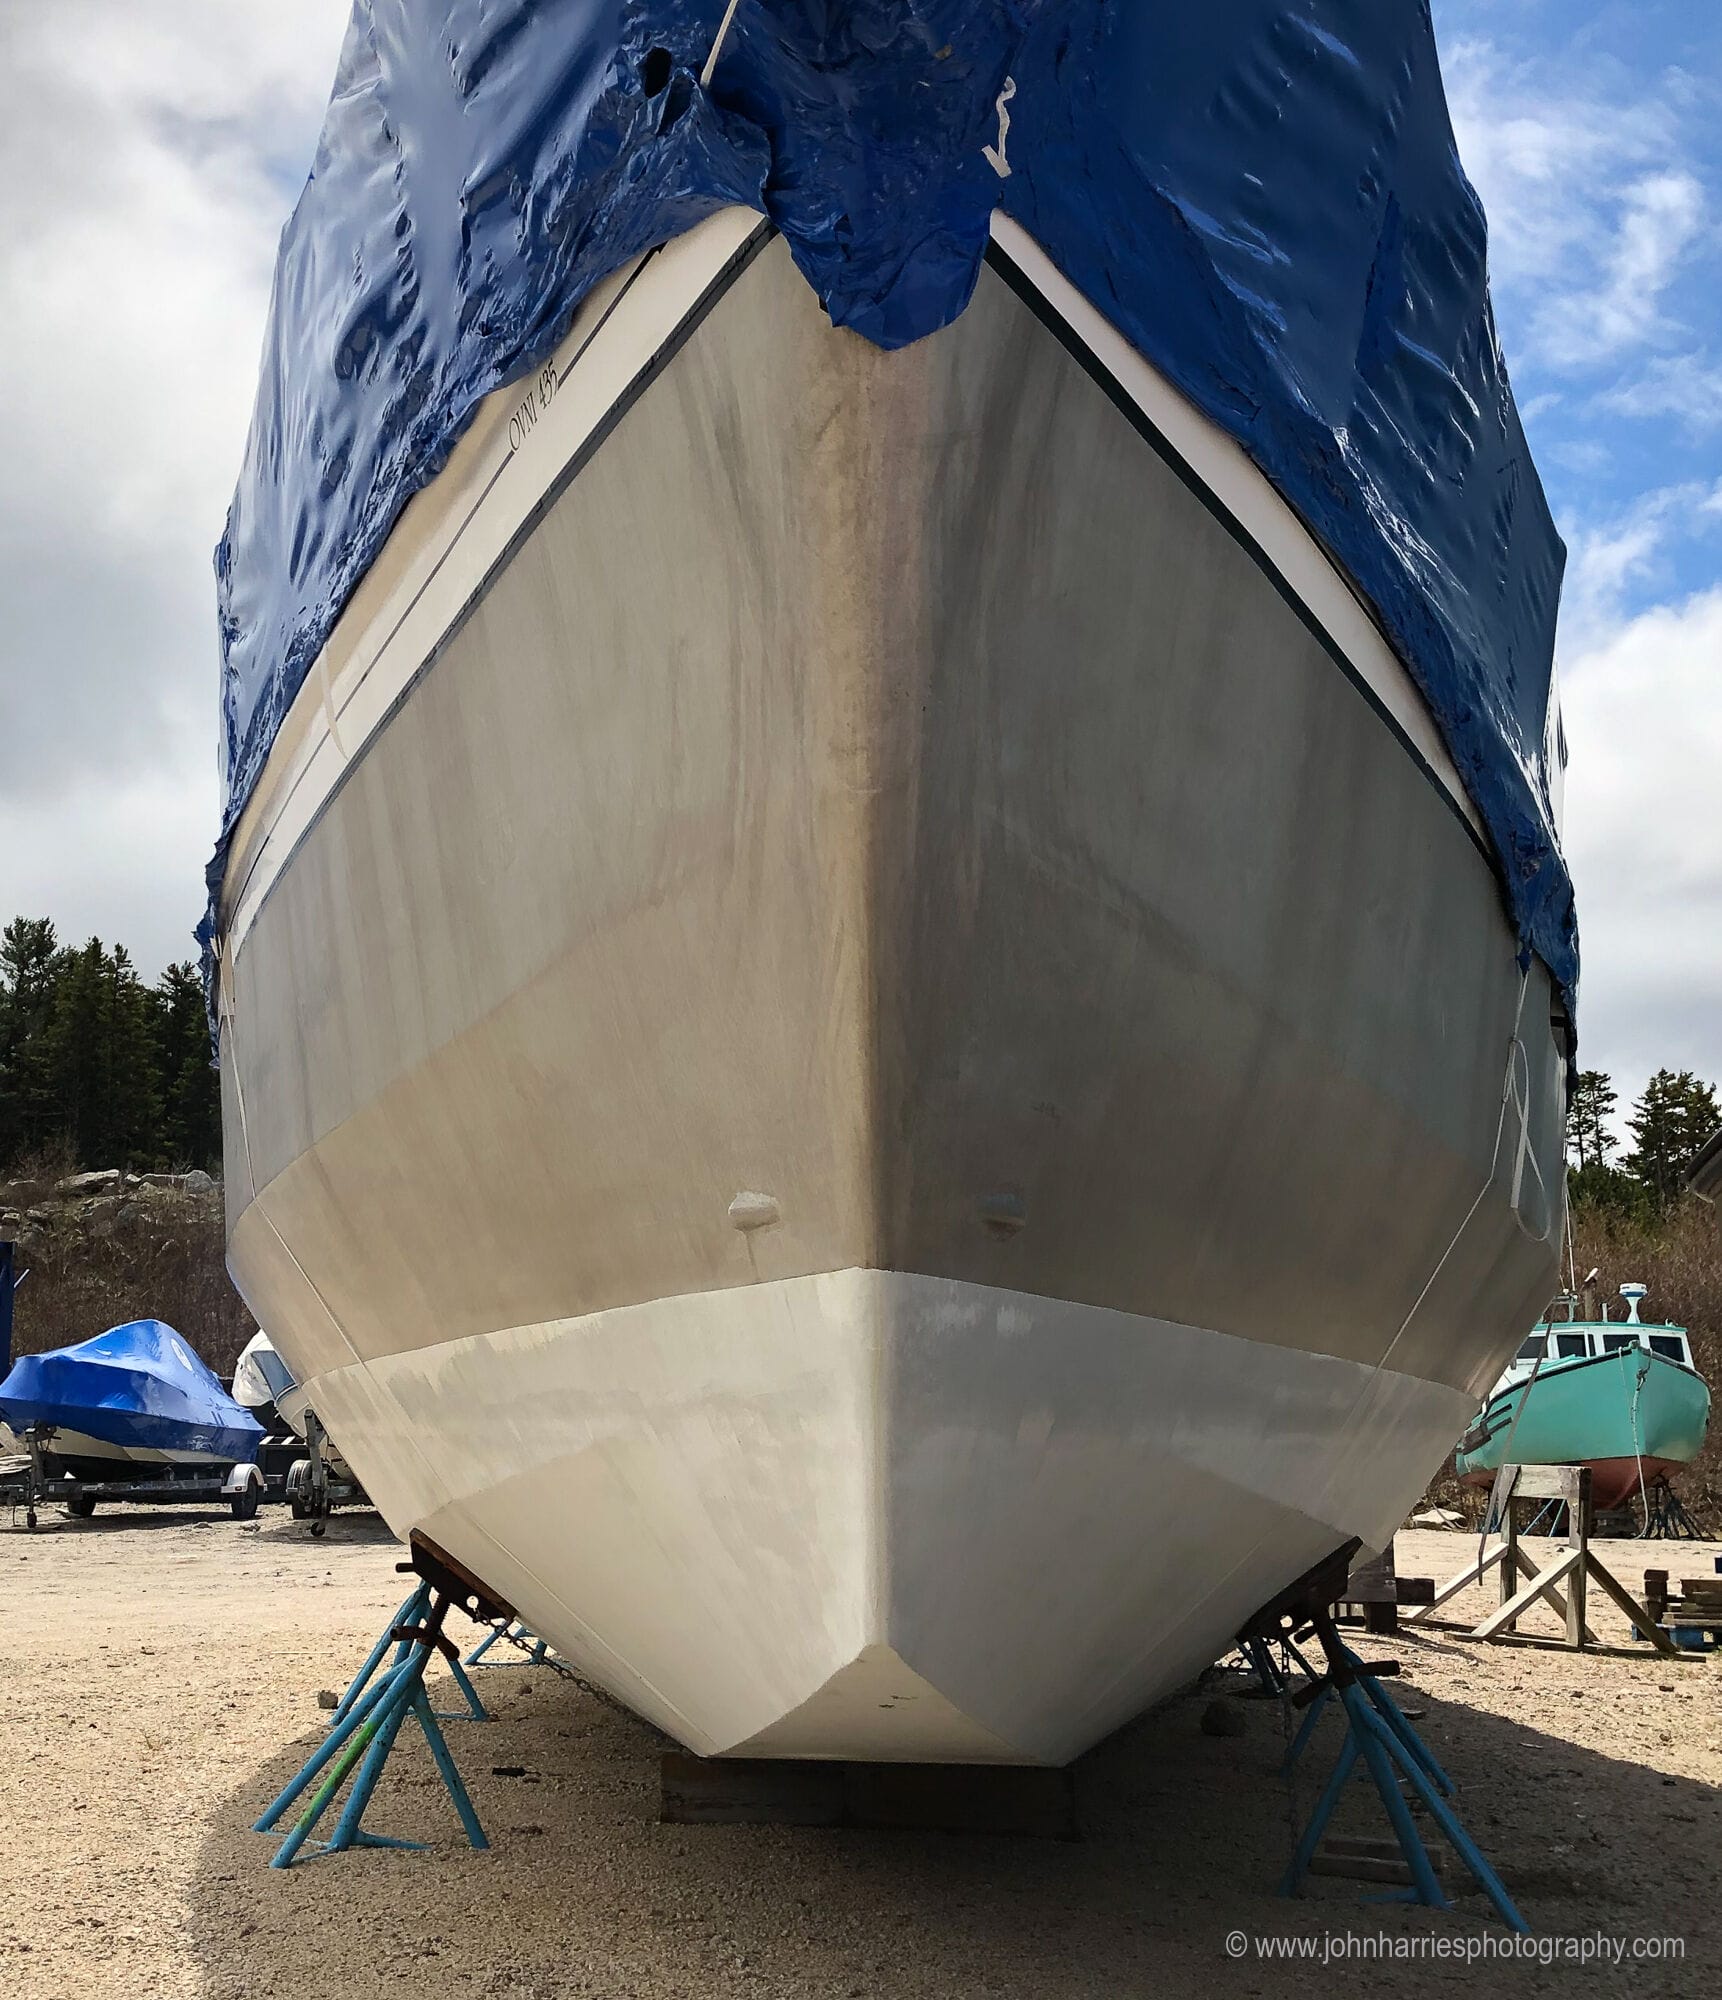 Hull Materials, Which Is Best? - Attainable Adventure Cruising